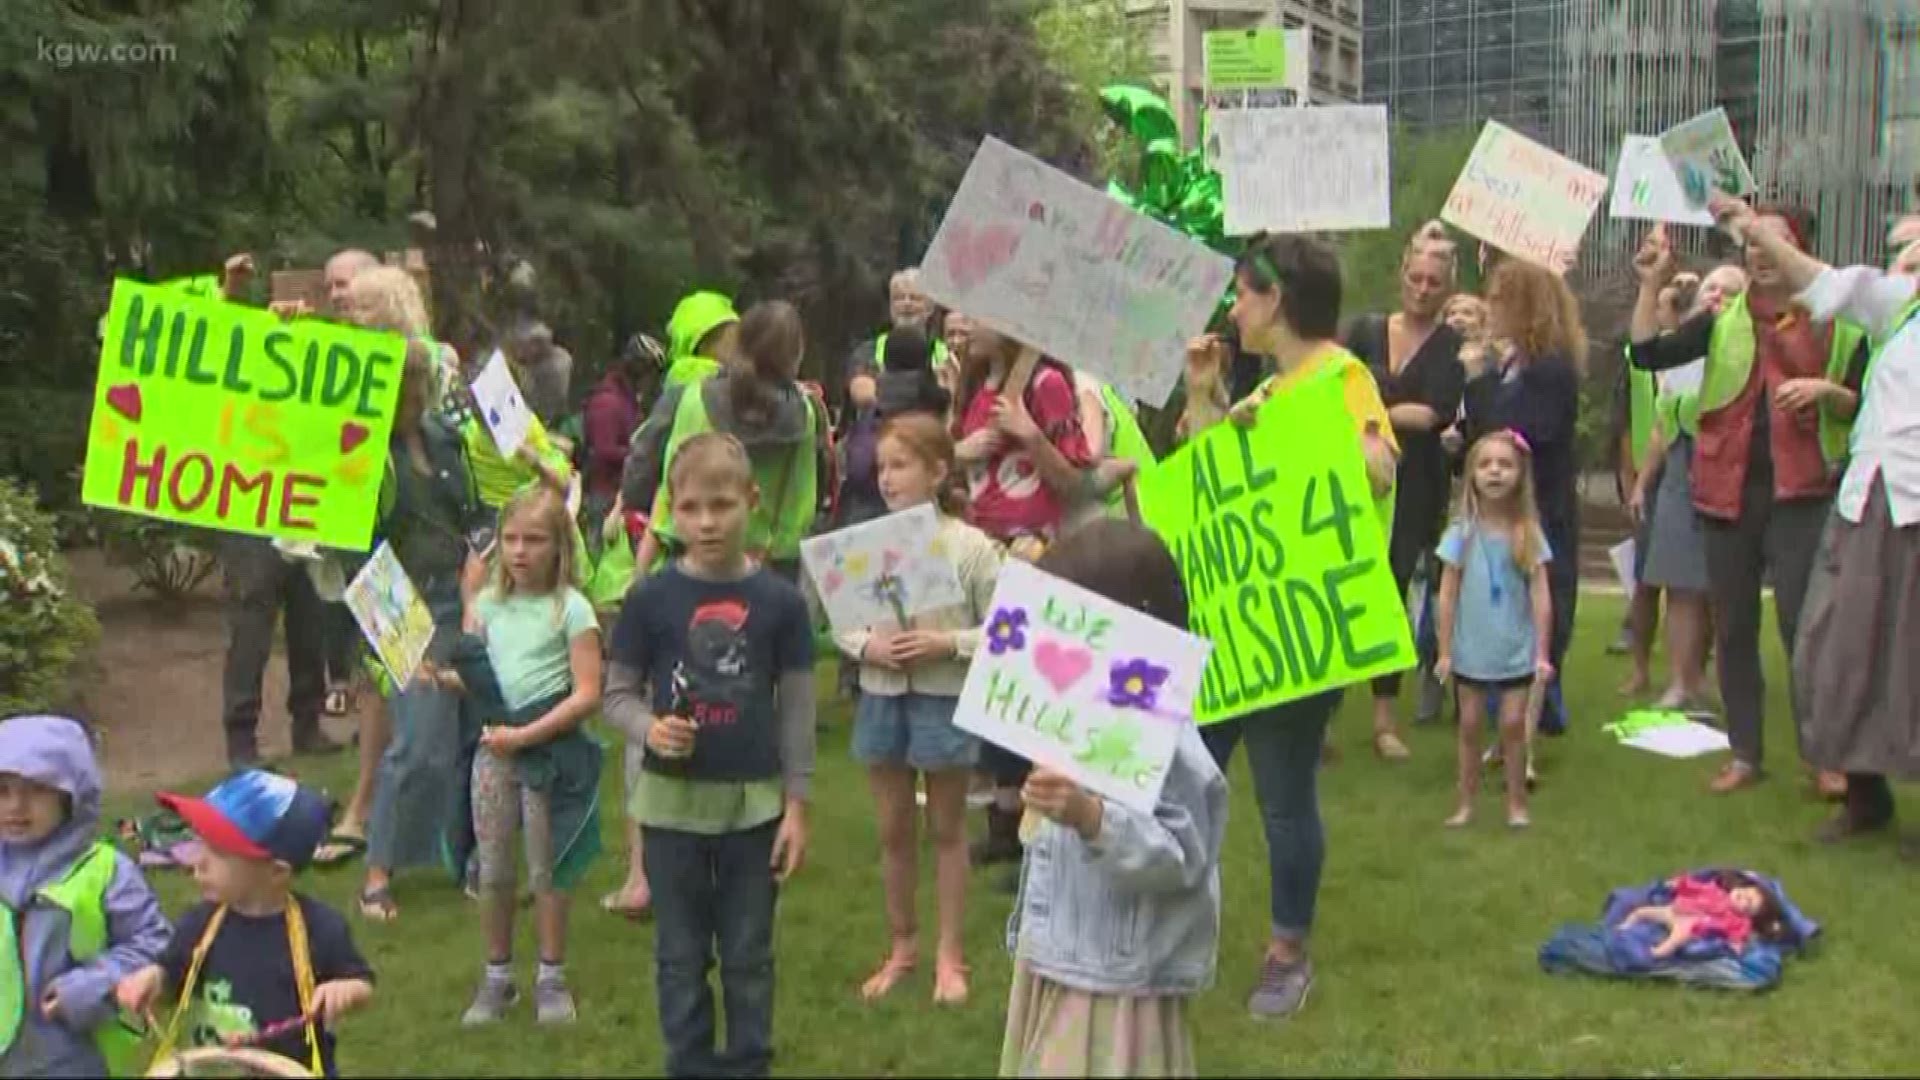 Local parents rallied to save community centers.